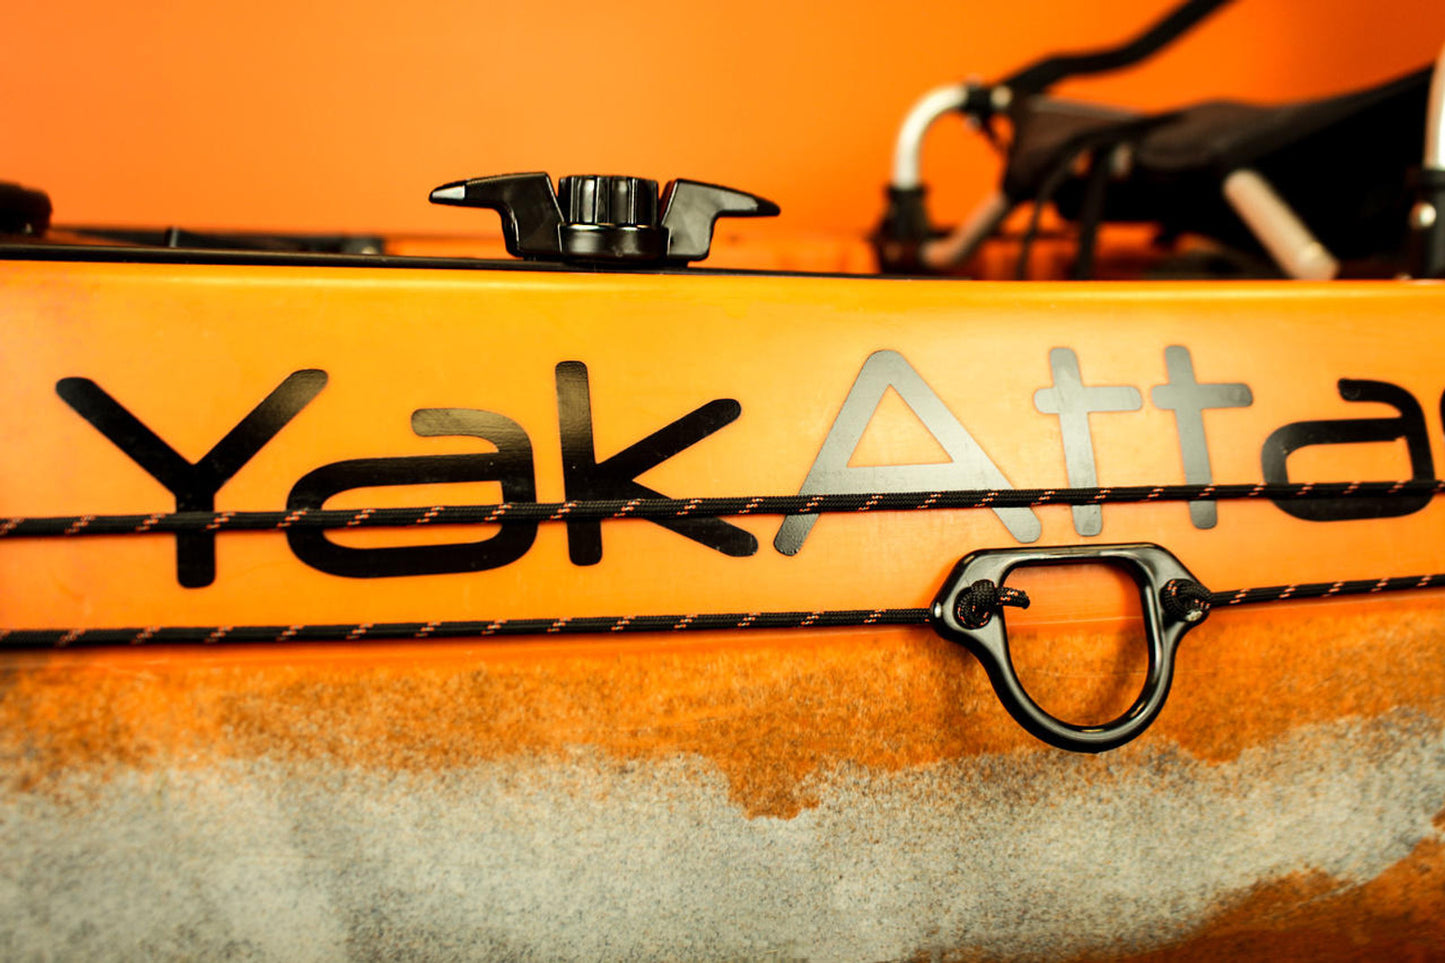 YakAttack GT Kayak Cleat, Track Mount Line Cleat